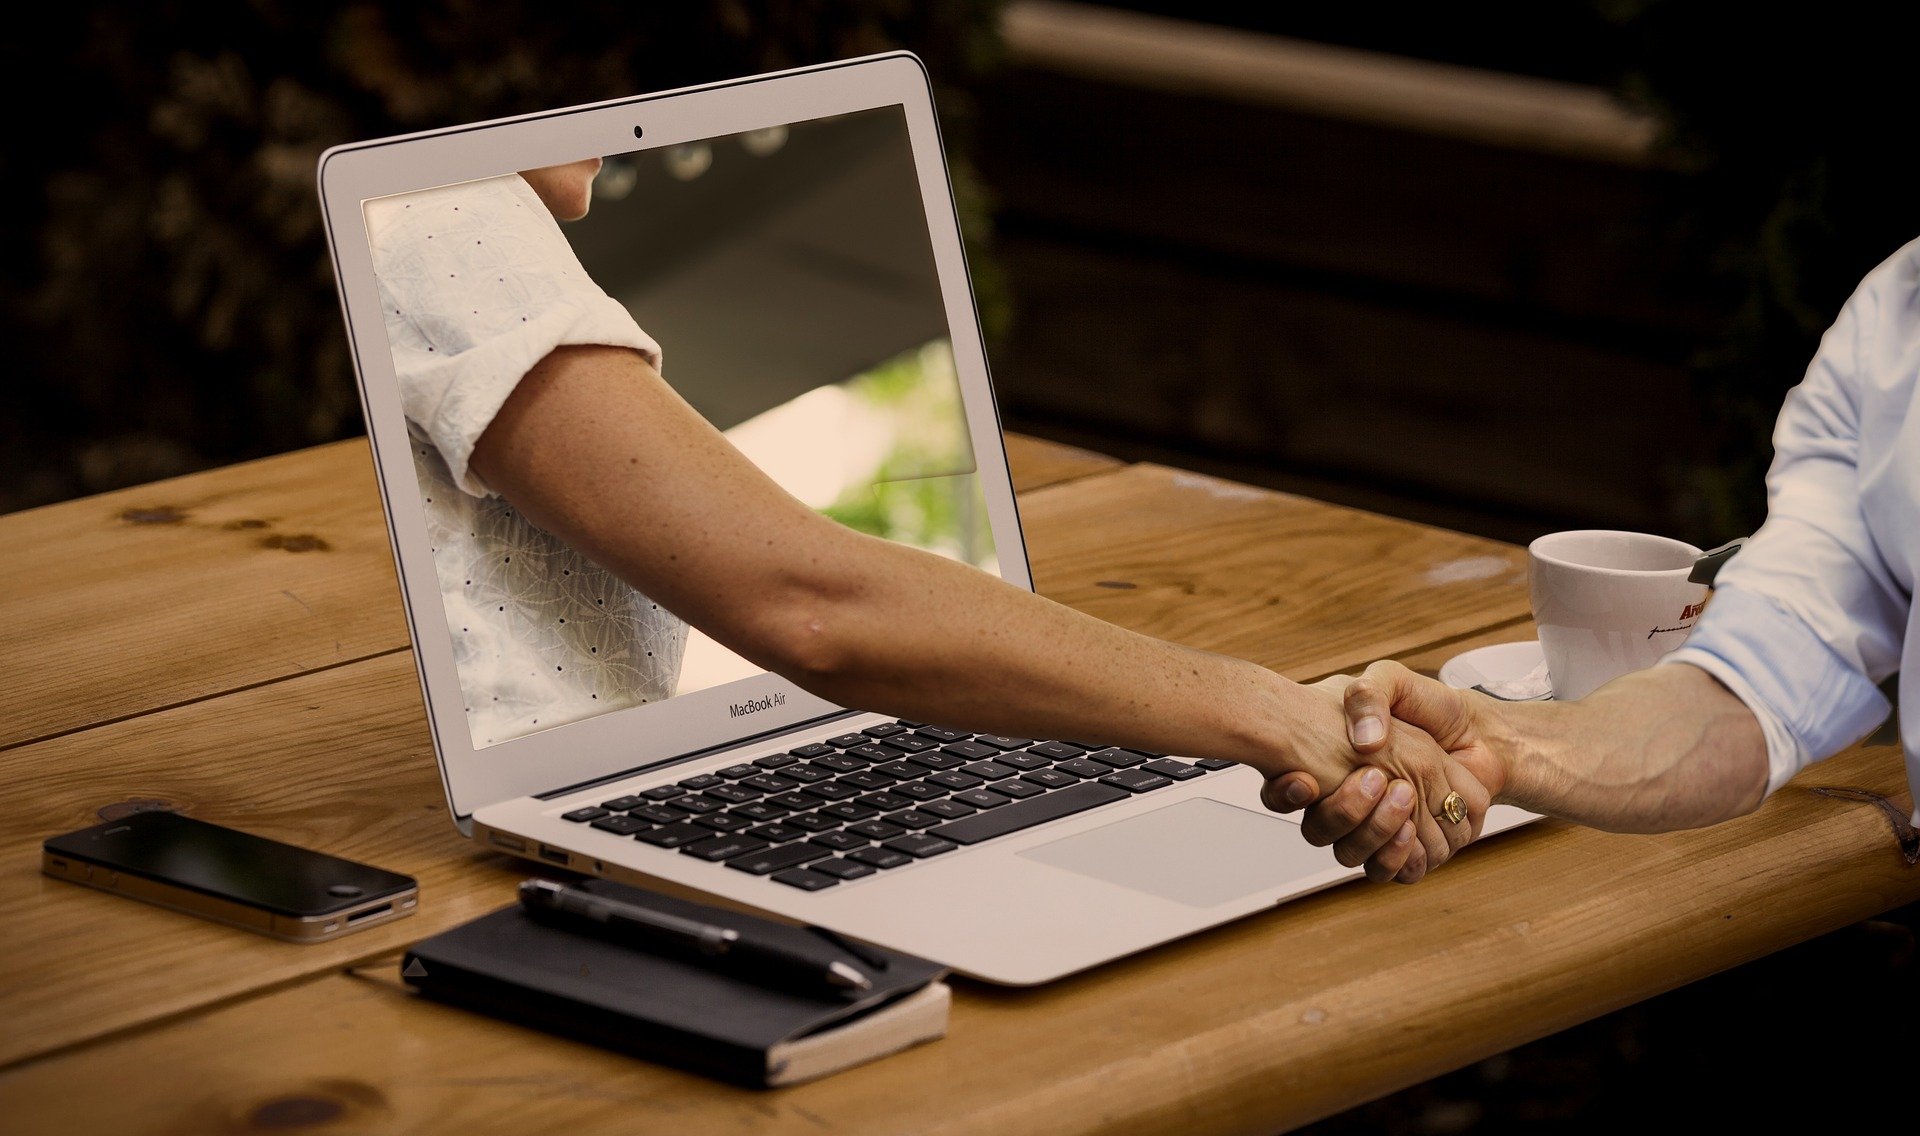 Two people shaking hands through a laptop screen.